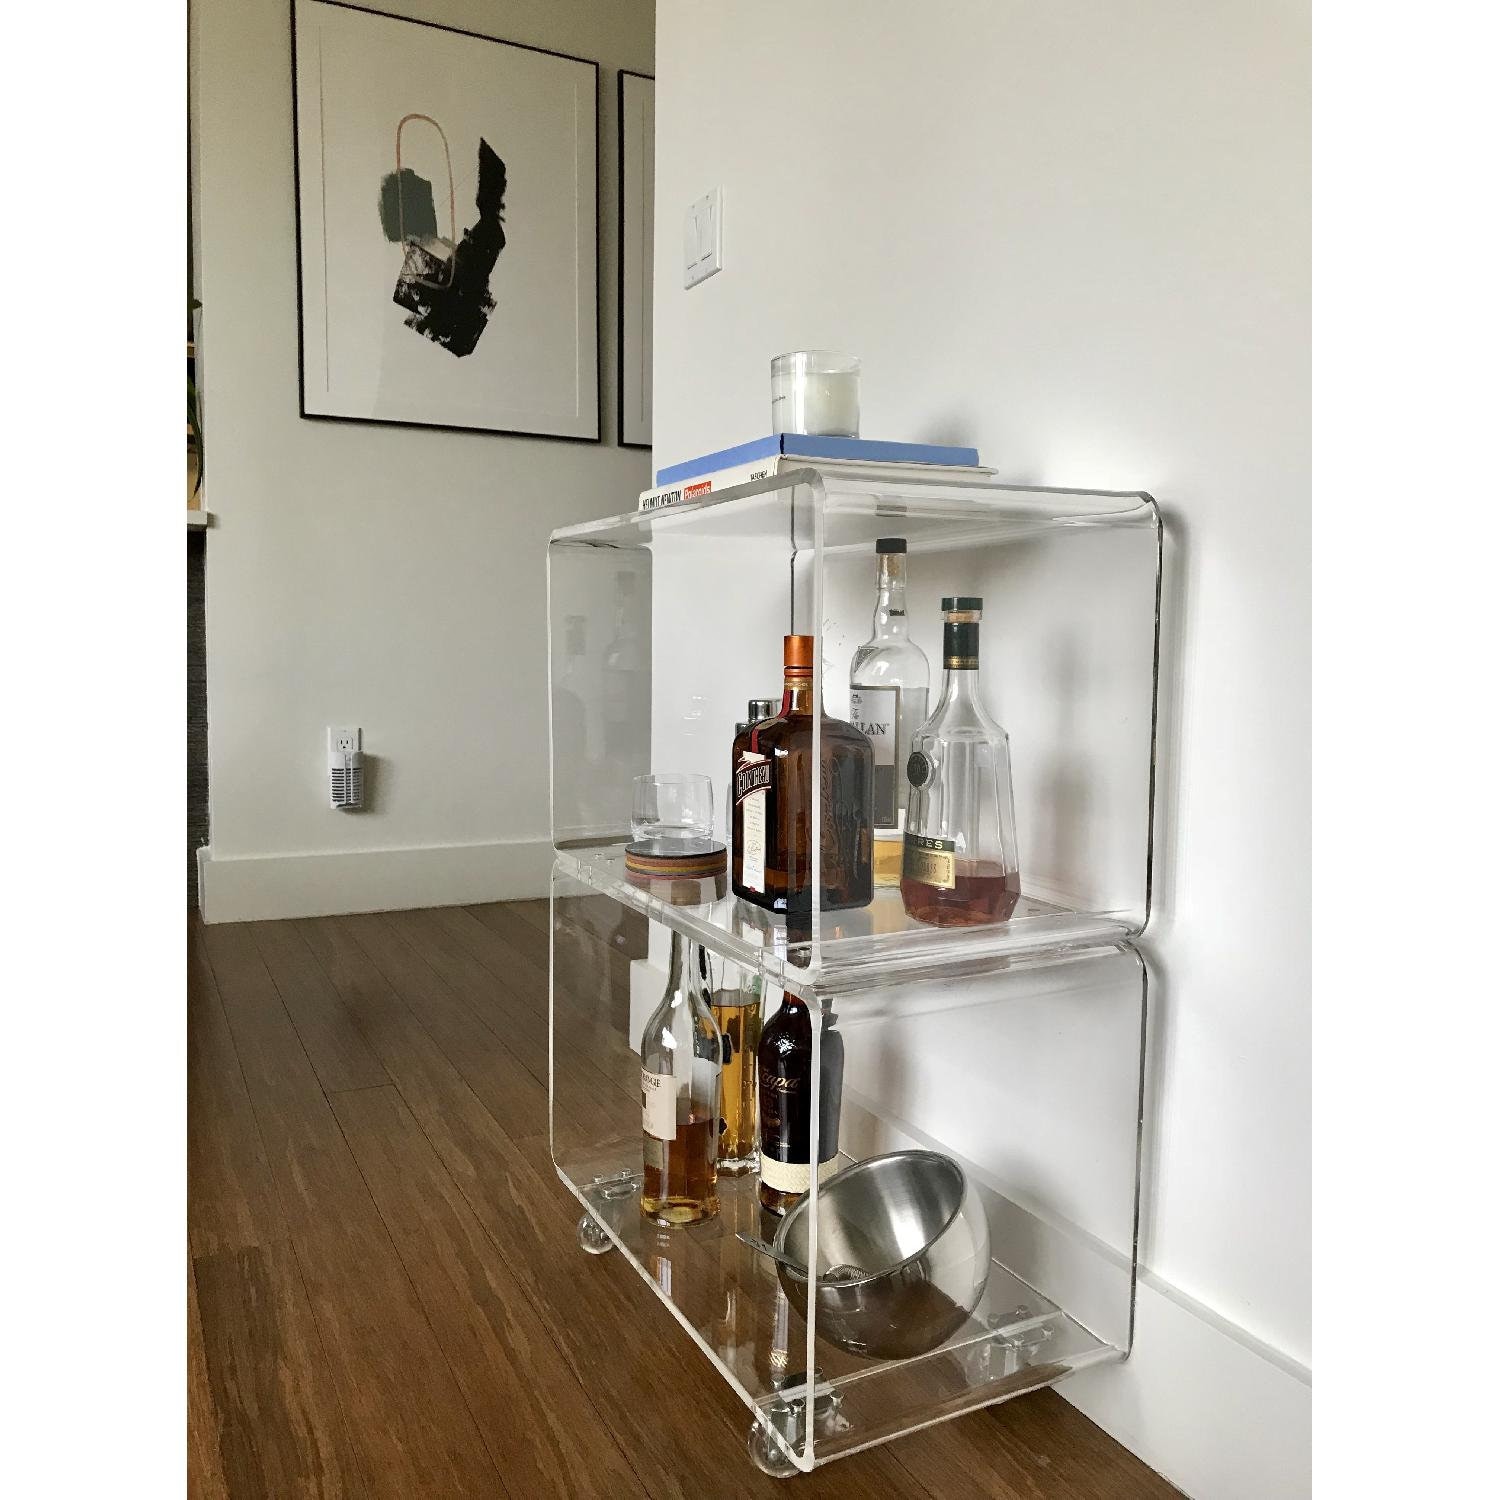 Roller cabinet with shelves, acrylic